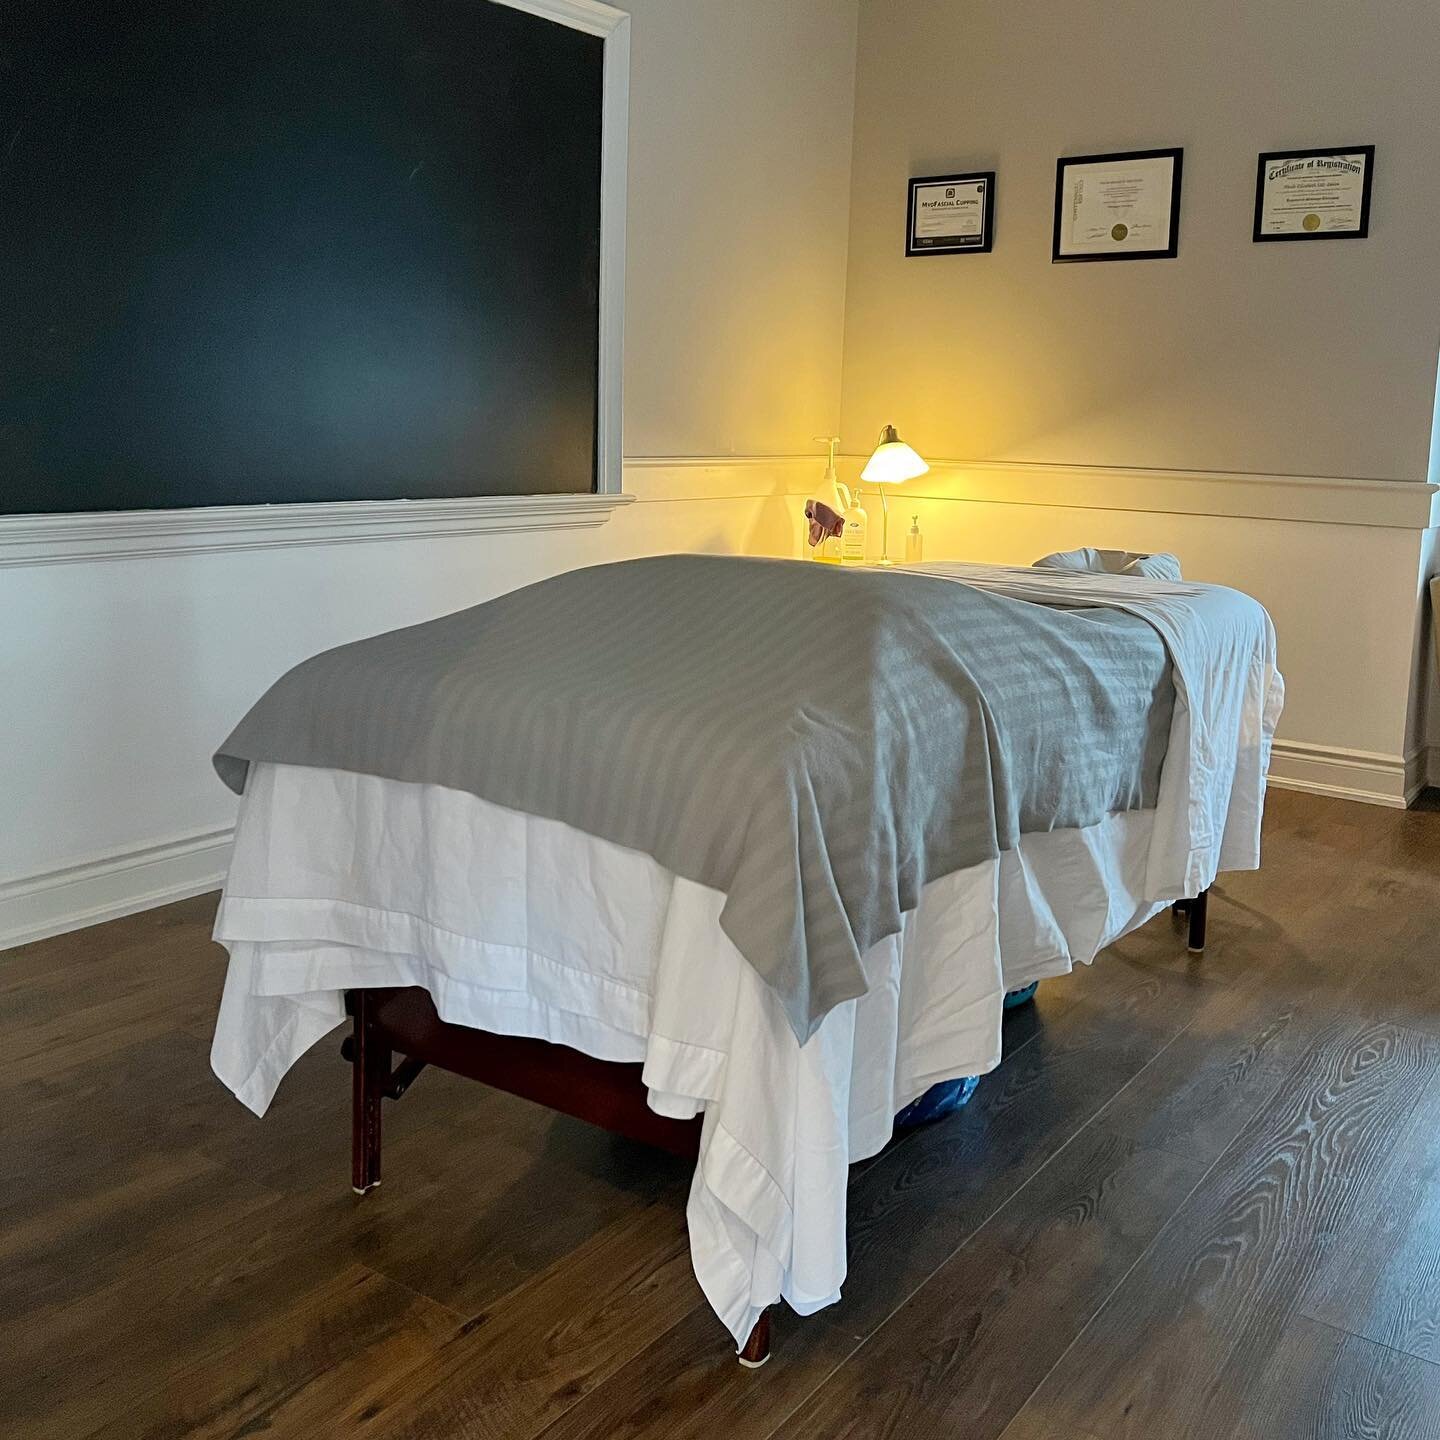 Looking to get a massage before the end of summer? Our registered massage therapist Nicole, is booking up quick!

For those hoping to snag an appointment, we recommend booking soon to avoid any disappointment, as she only has a few left ✨

To book co